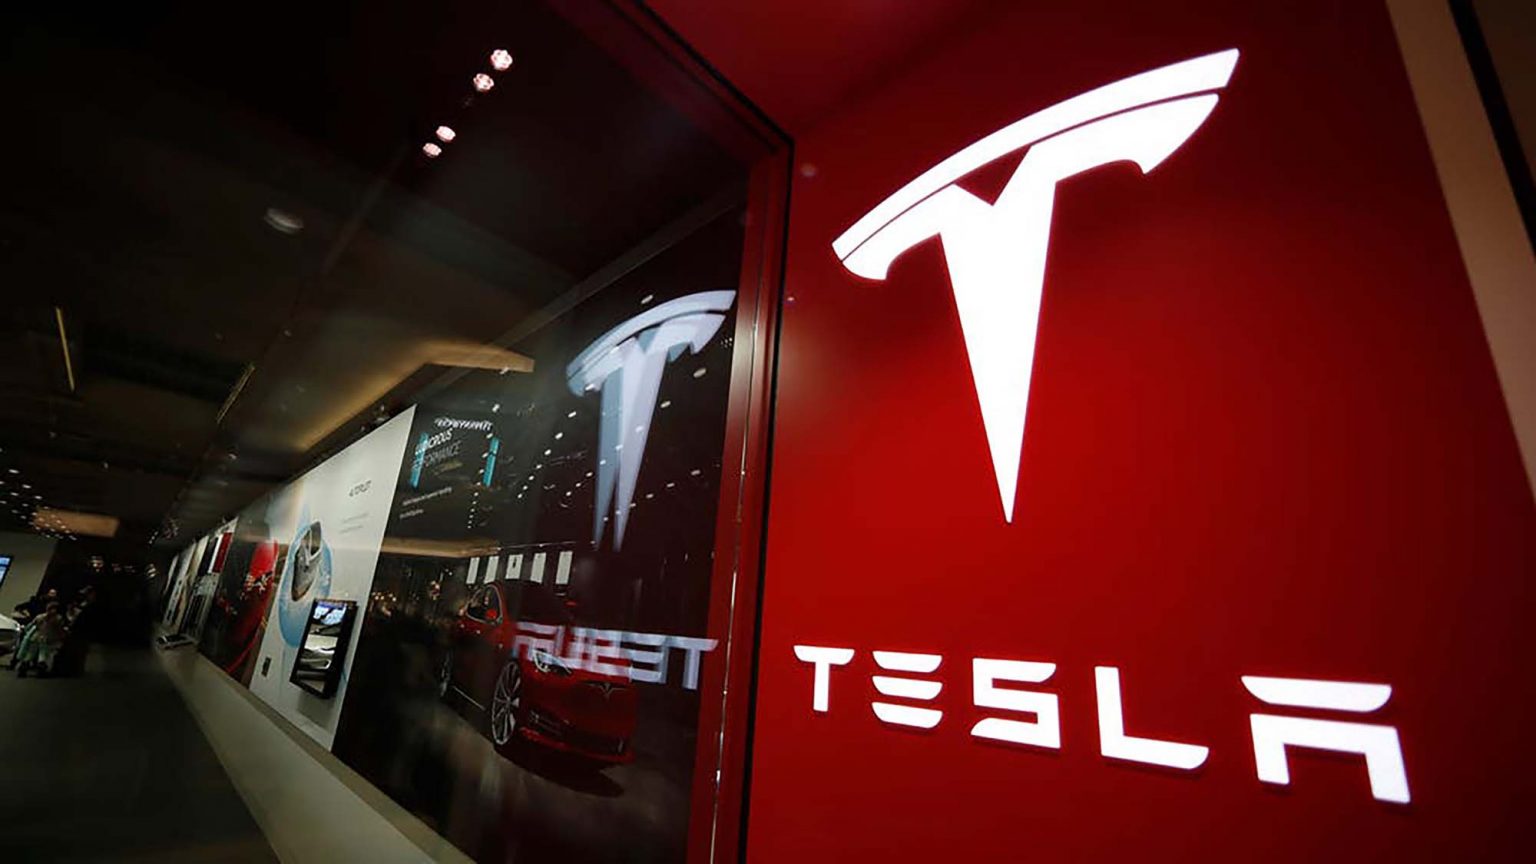 Tesla sales in the UK nearly doubled last year to more than £1bn and